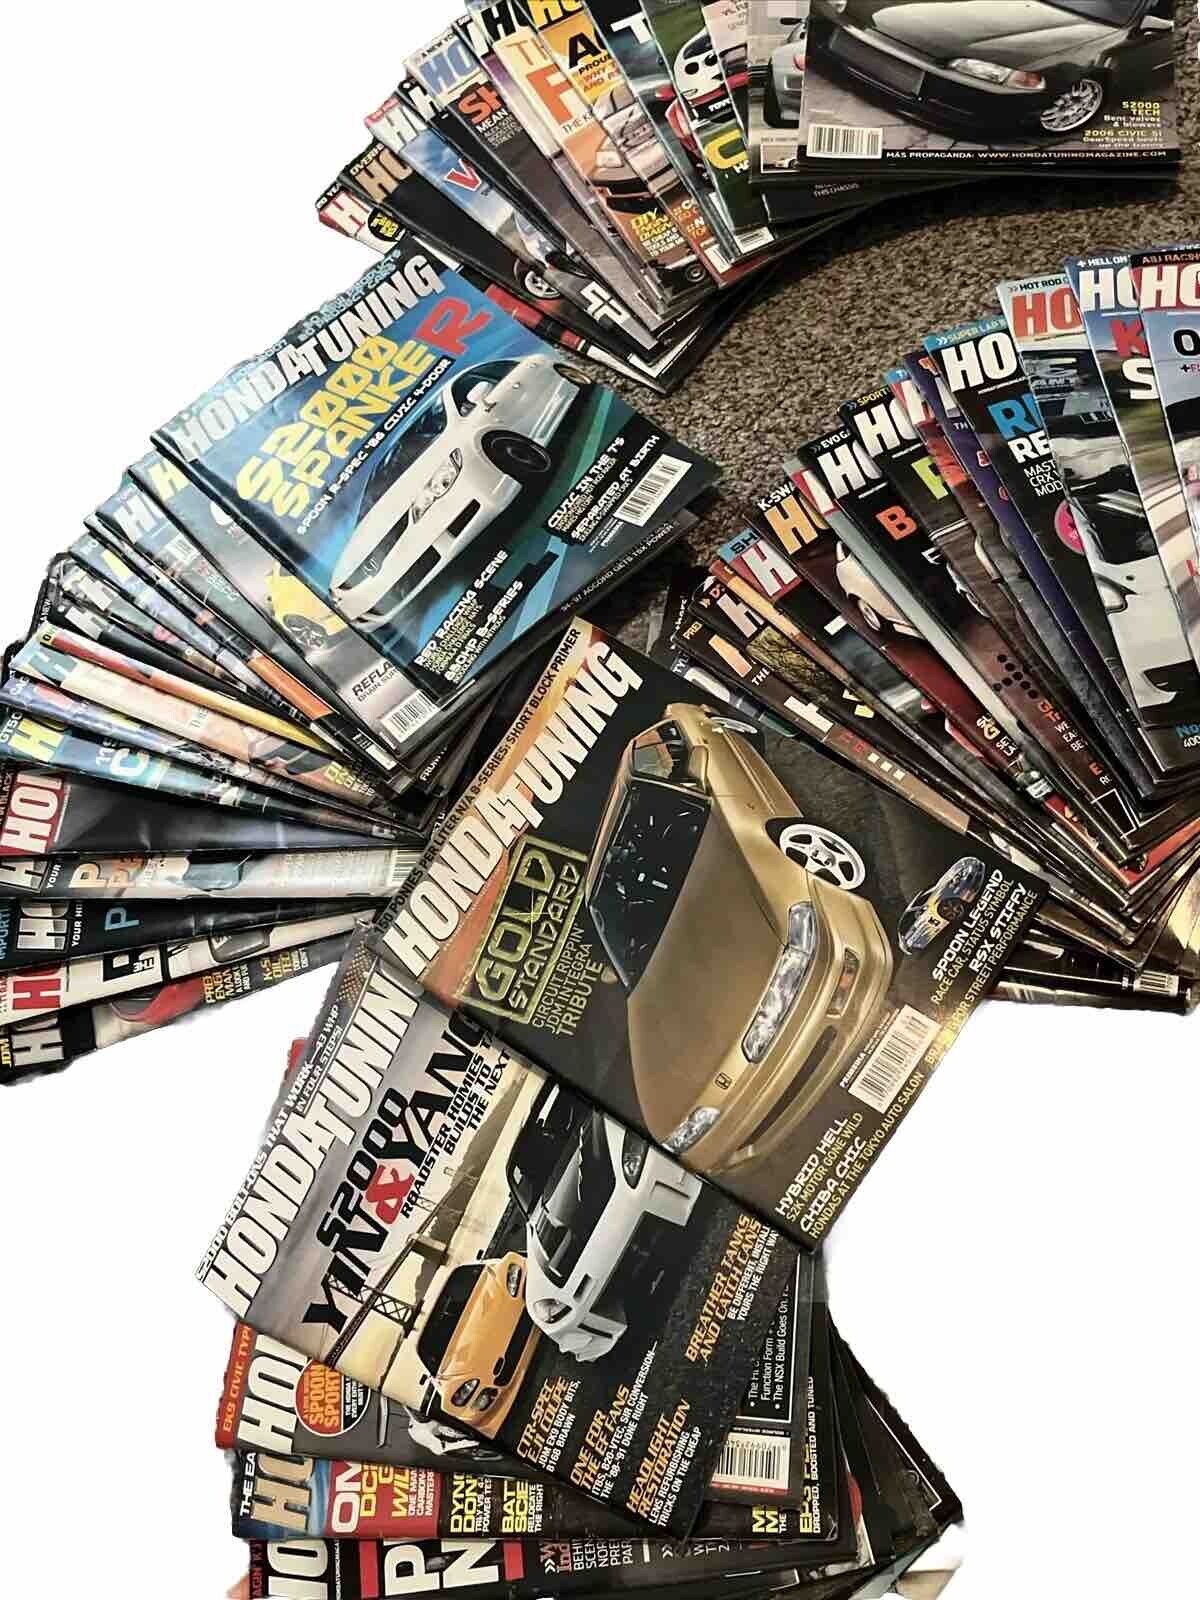 Honda Tuning Magazine Collection, 2005-2012 Store Bought Issues, Perfect Cond.